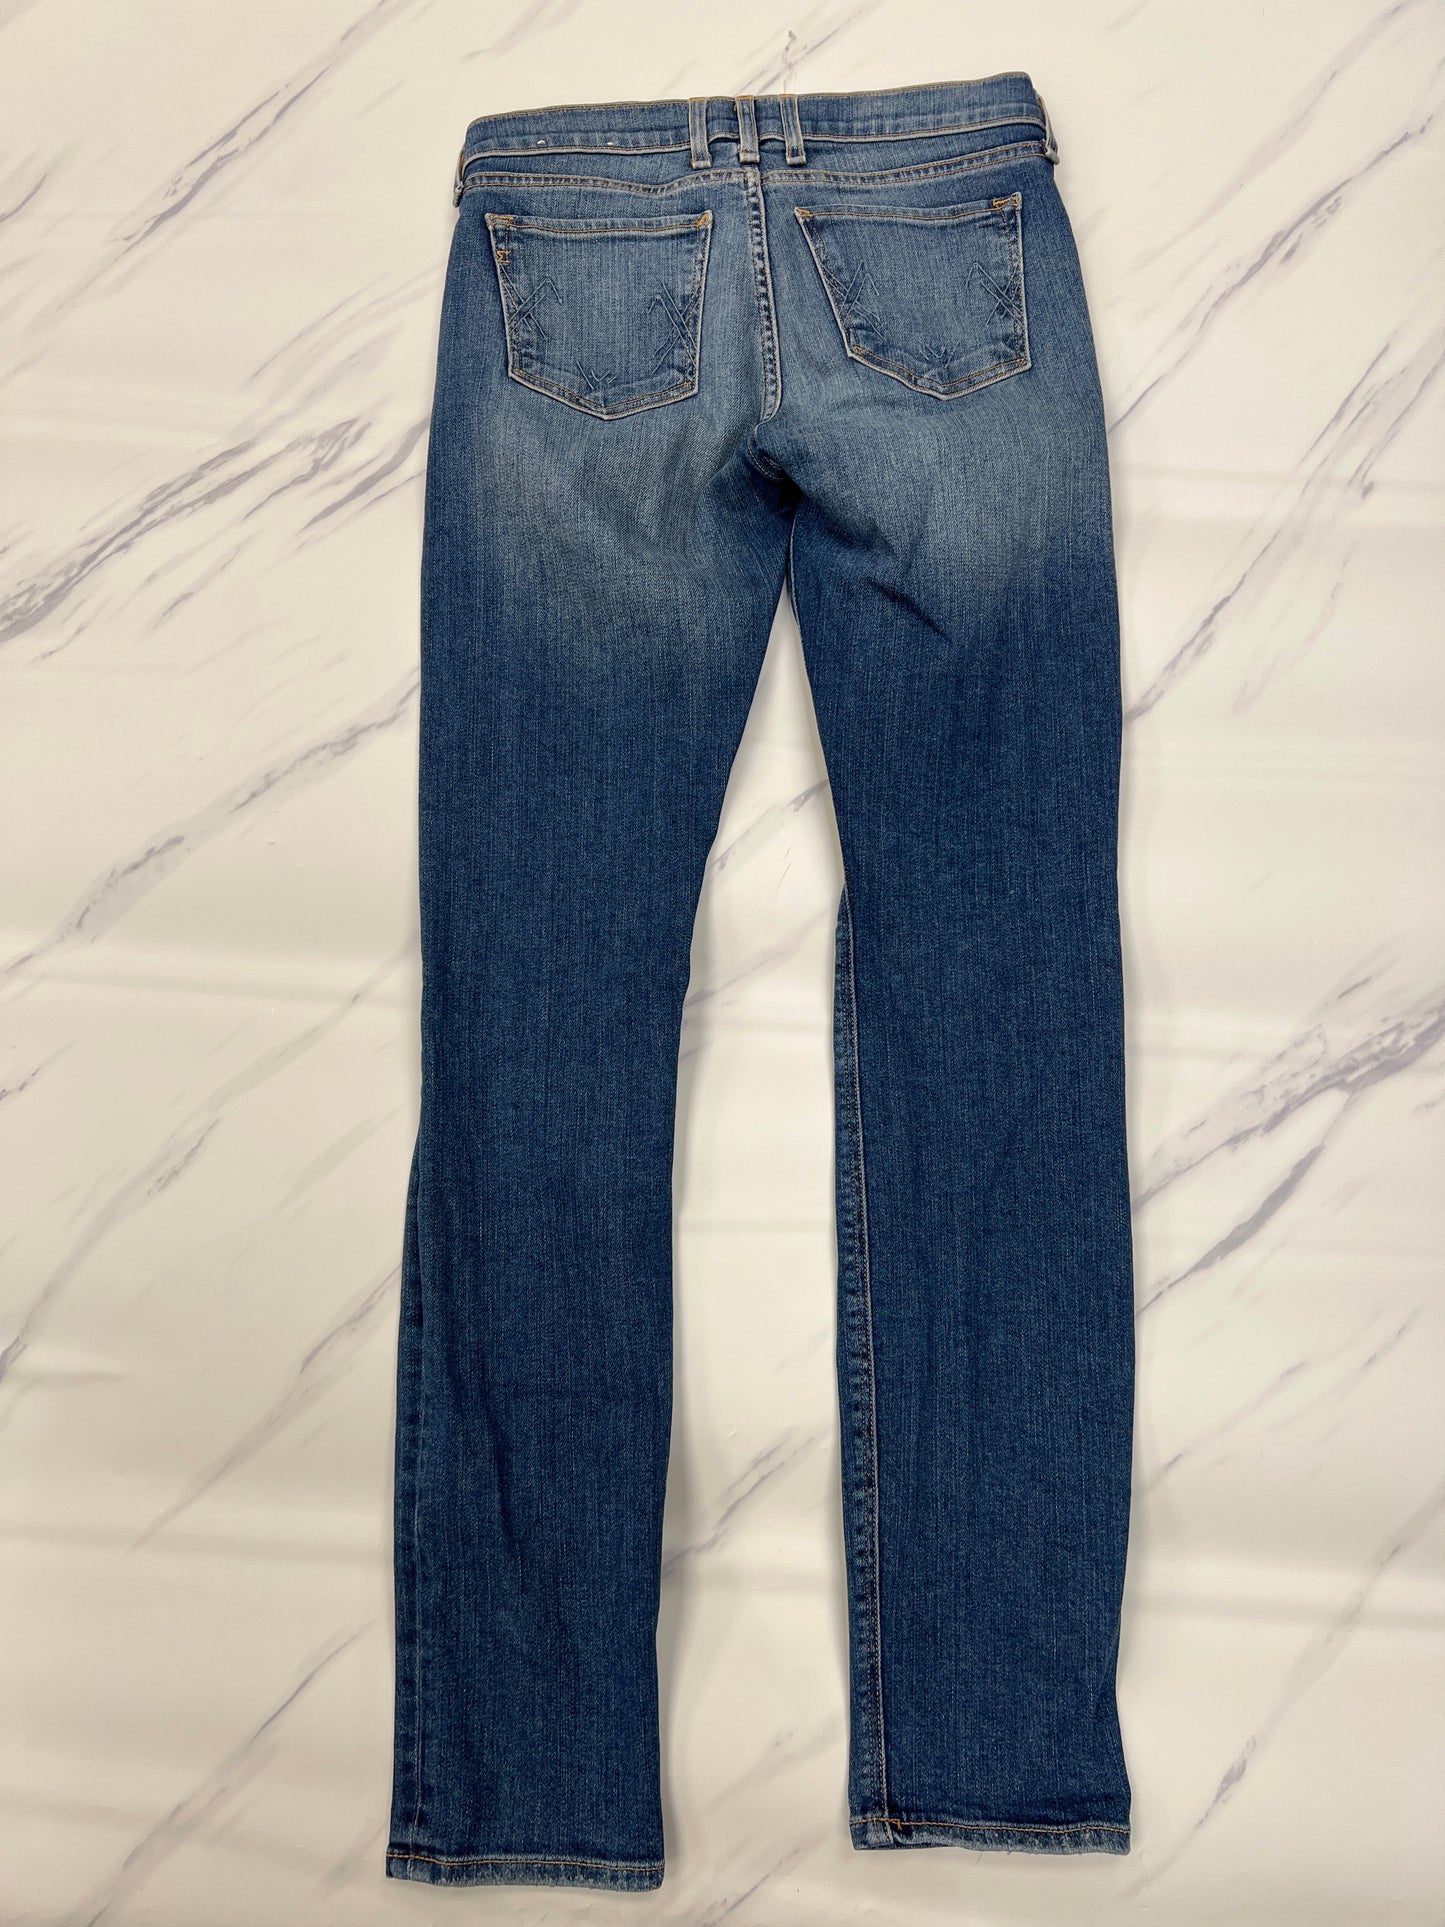 Jeans Skinny By Cmb  Size: 0